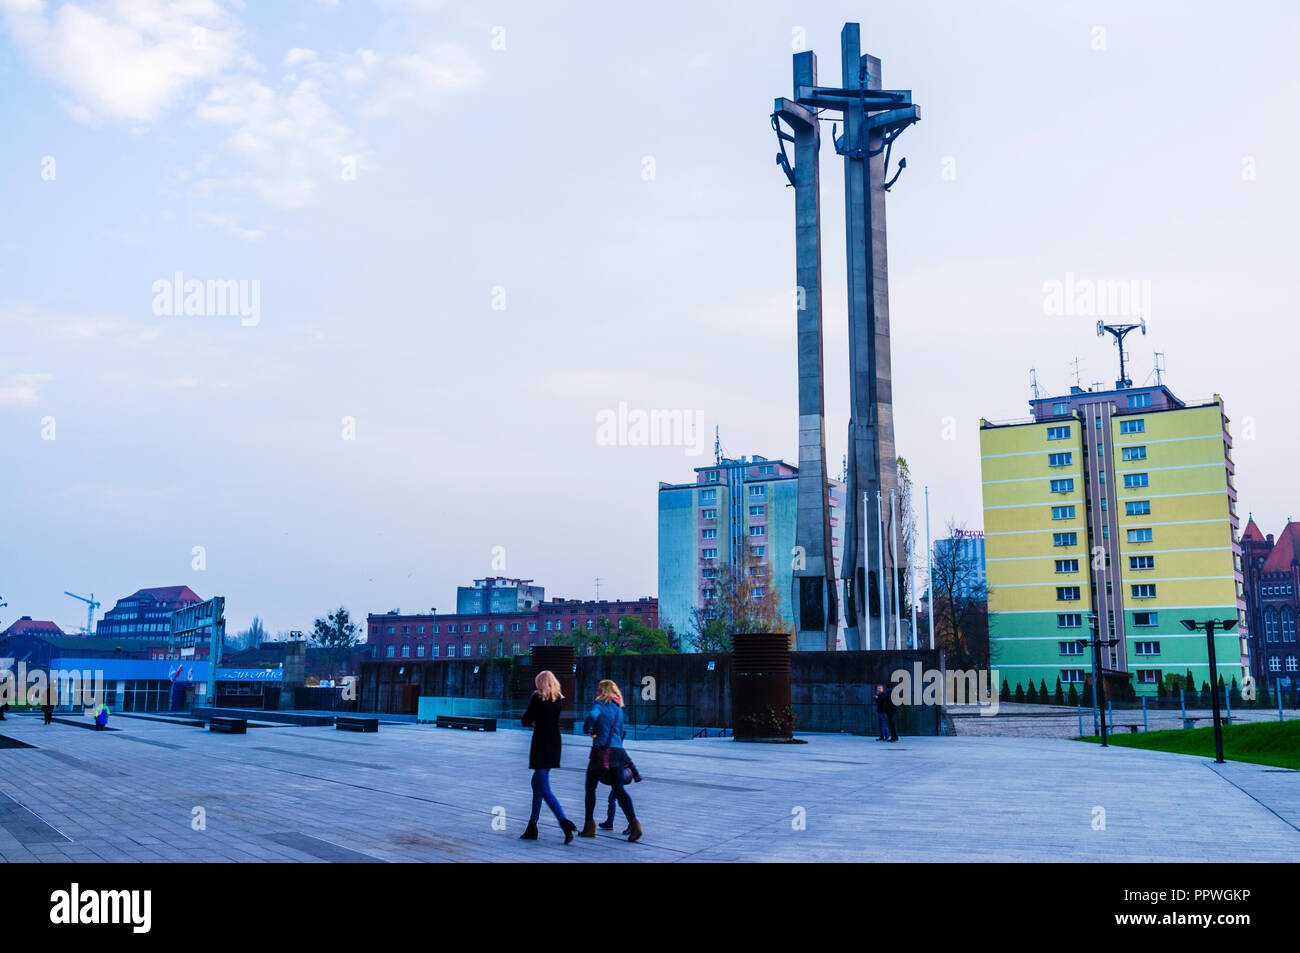 Gdansk, Pomerania, Poland : Two women walk past the Monument to the Fallen Shipyard Workers of 1970 at Solidarity Square (Plac Solidarności) Designed  Stock Photo